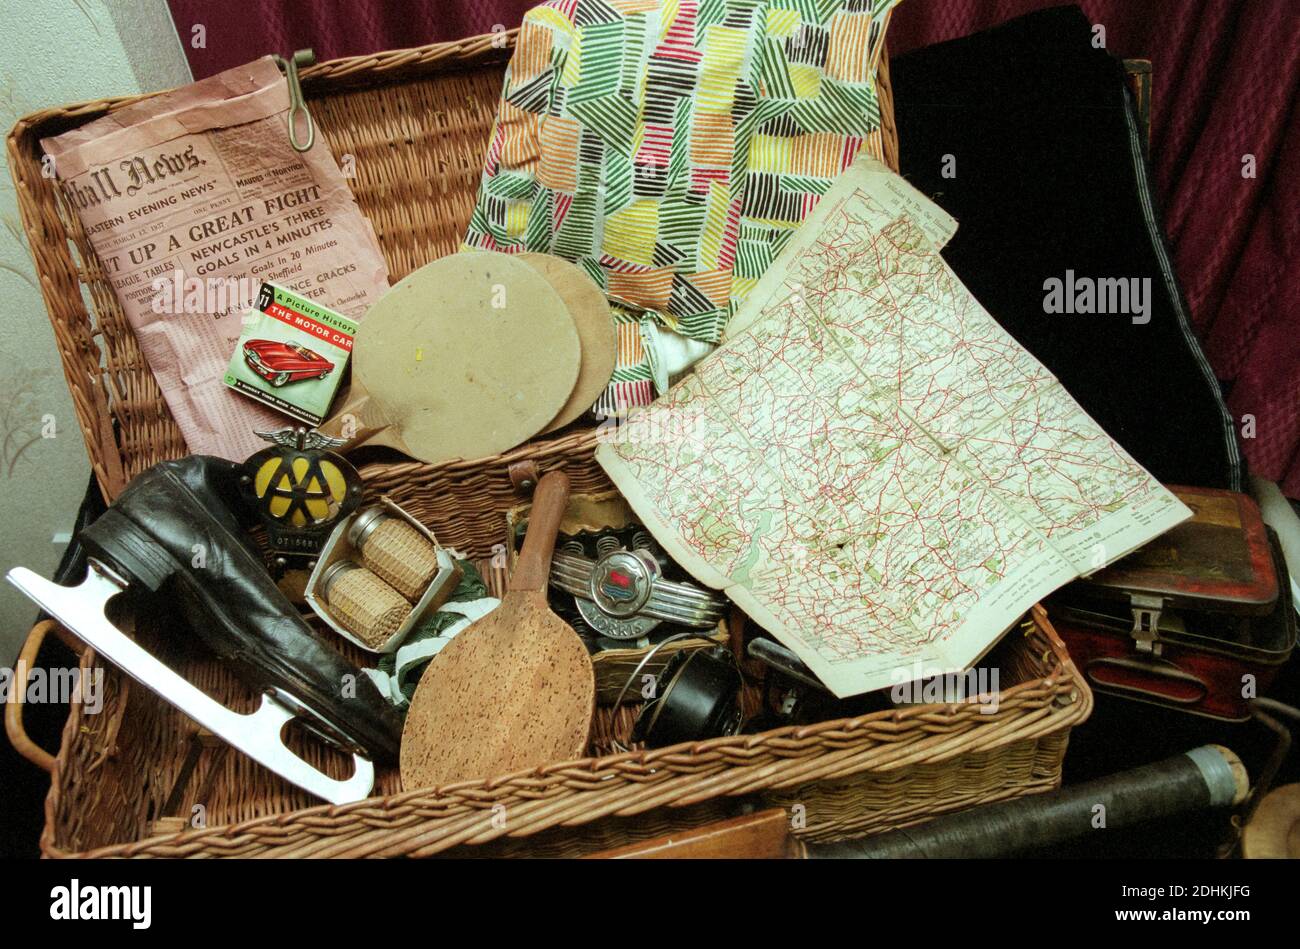 Old wicker basket containing memorabilia from the past, UK Stock Photo